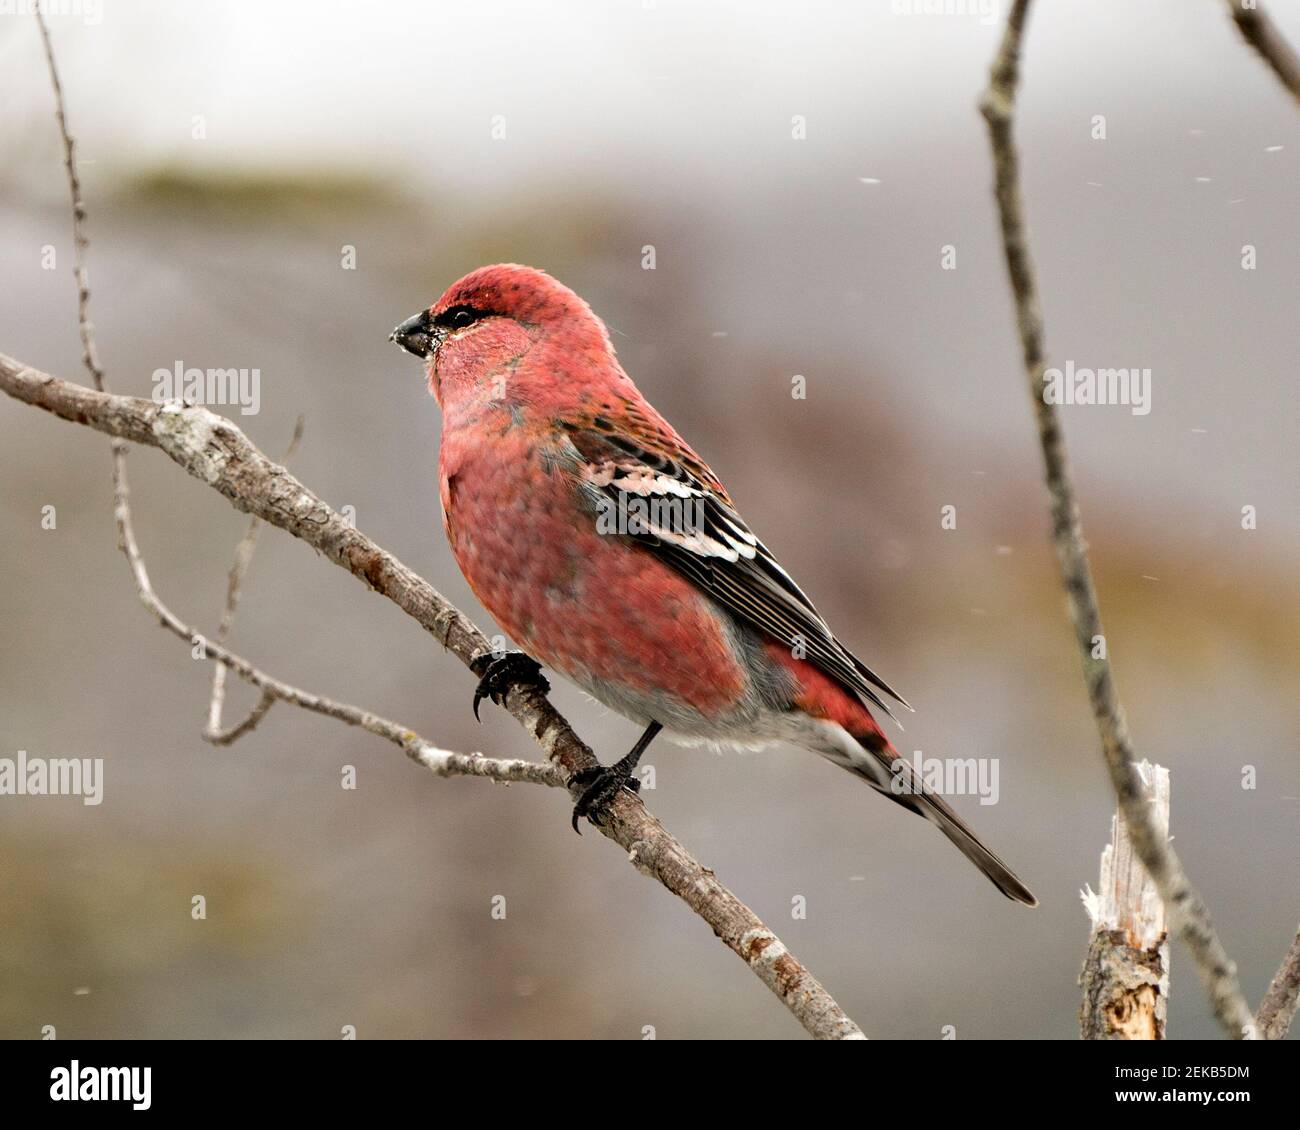 Pine Grosbeak close-up profile view, perched  with a blur background in its environment and habitat displaying red feather plumage. Image. Picture. Po Stock Photo